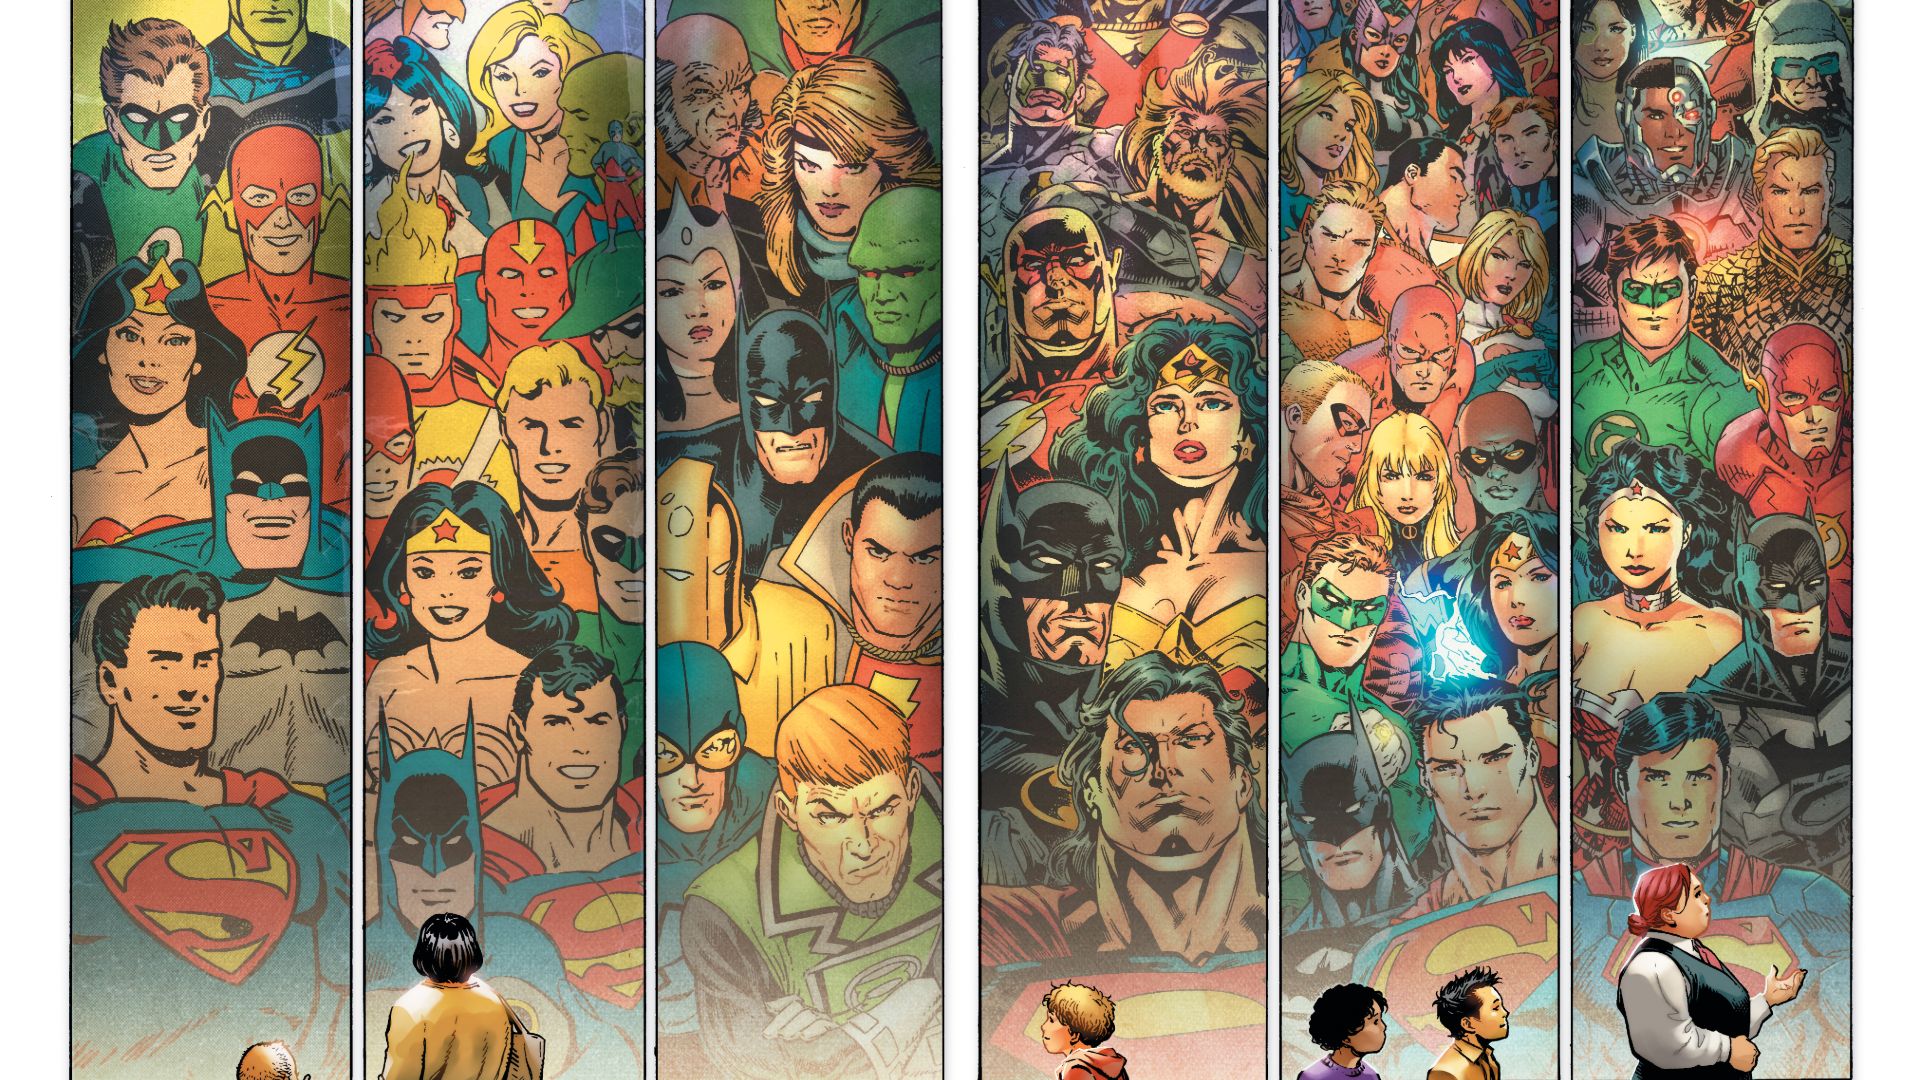 Greatest Justice League Stories